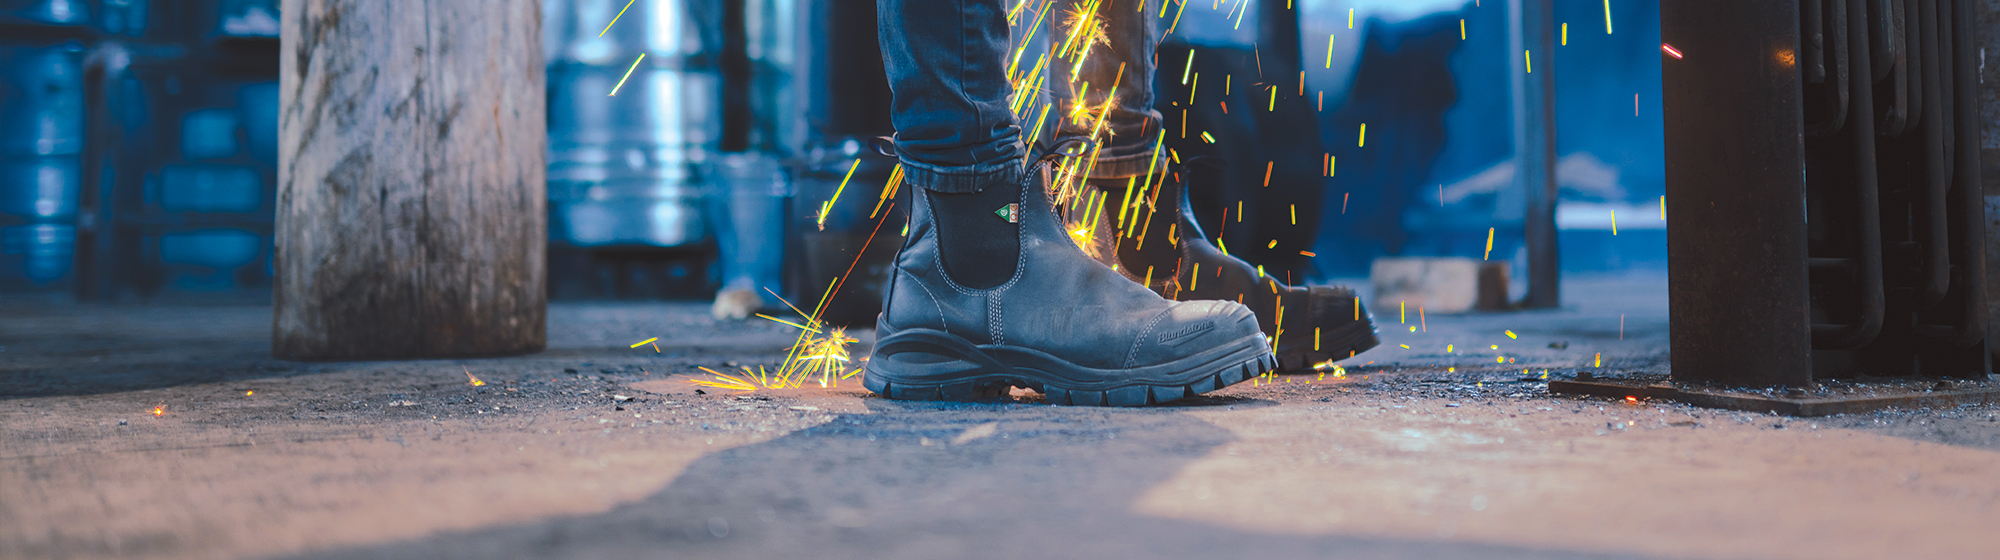 Work & Safety - Blundstone Canada - Chelsea boots